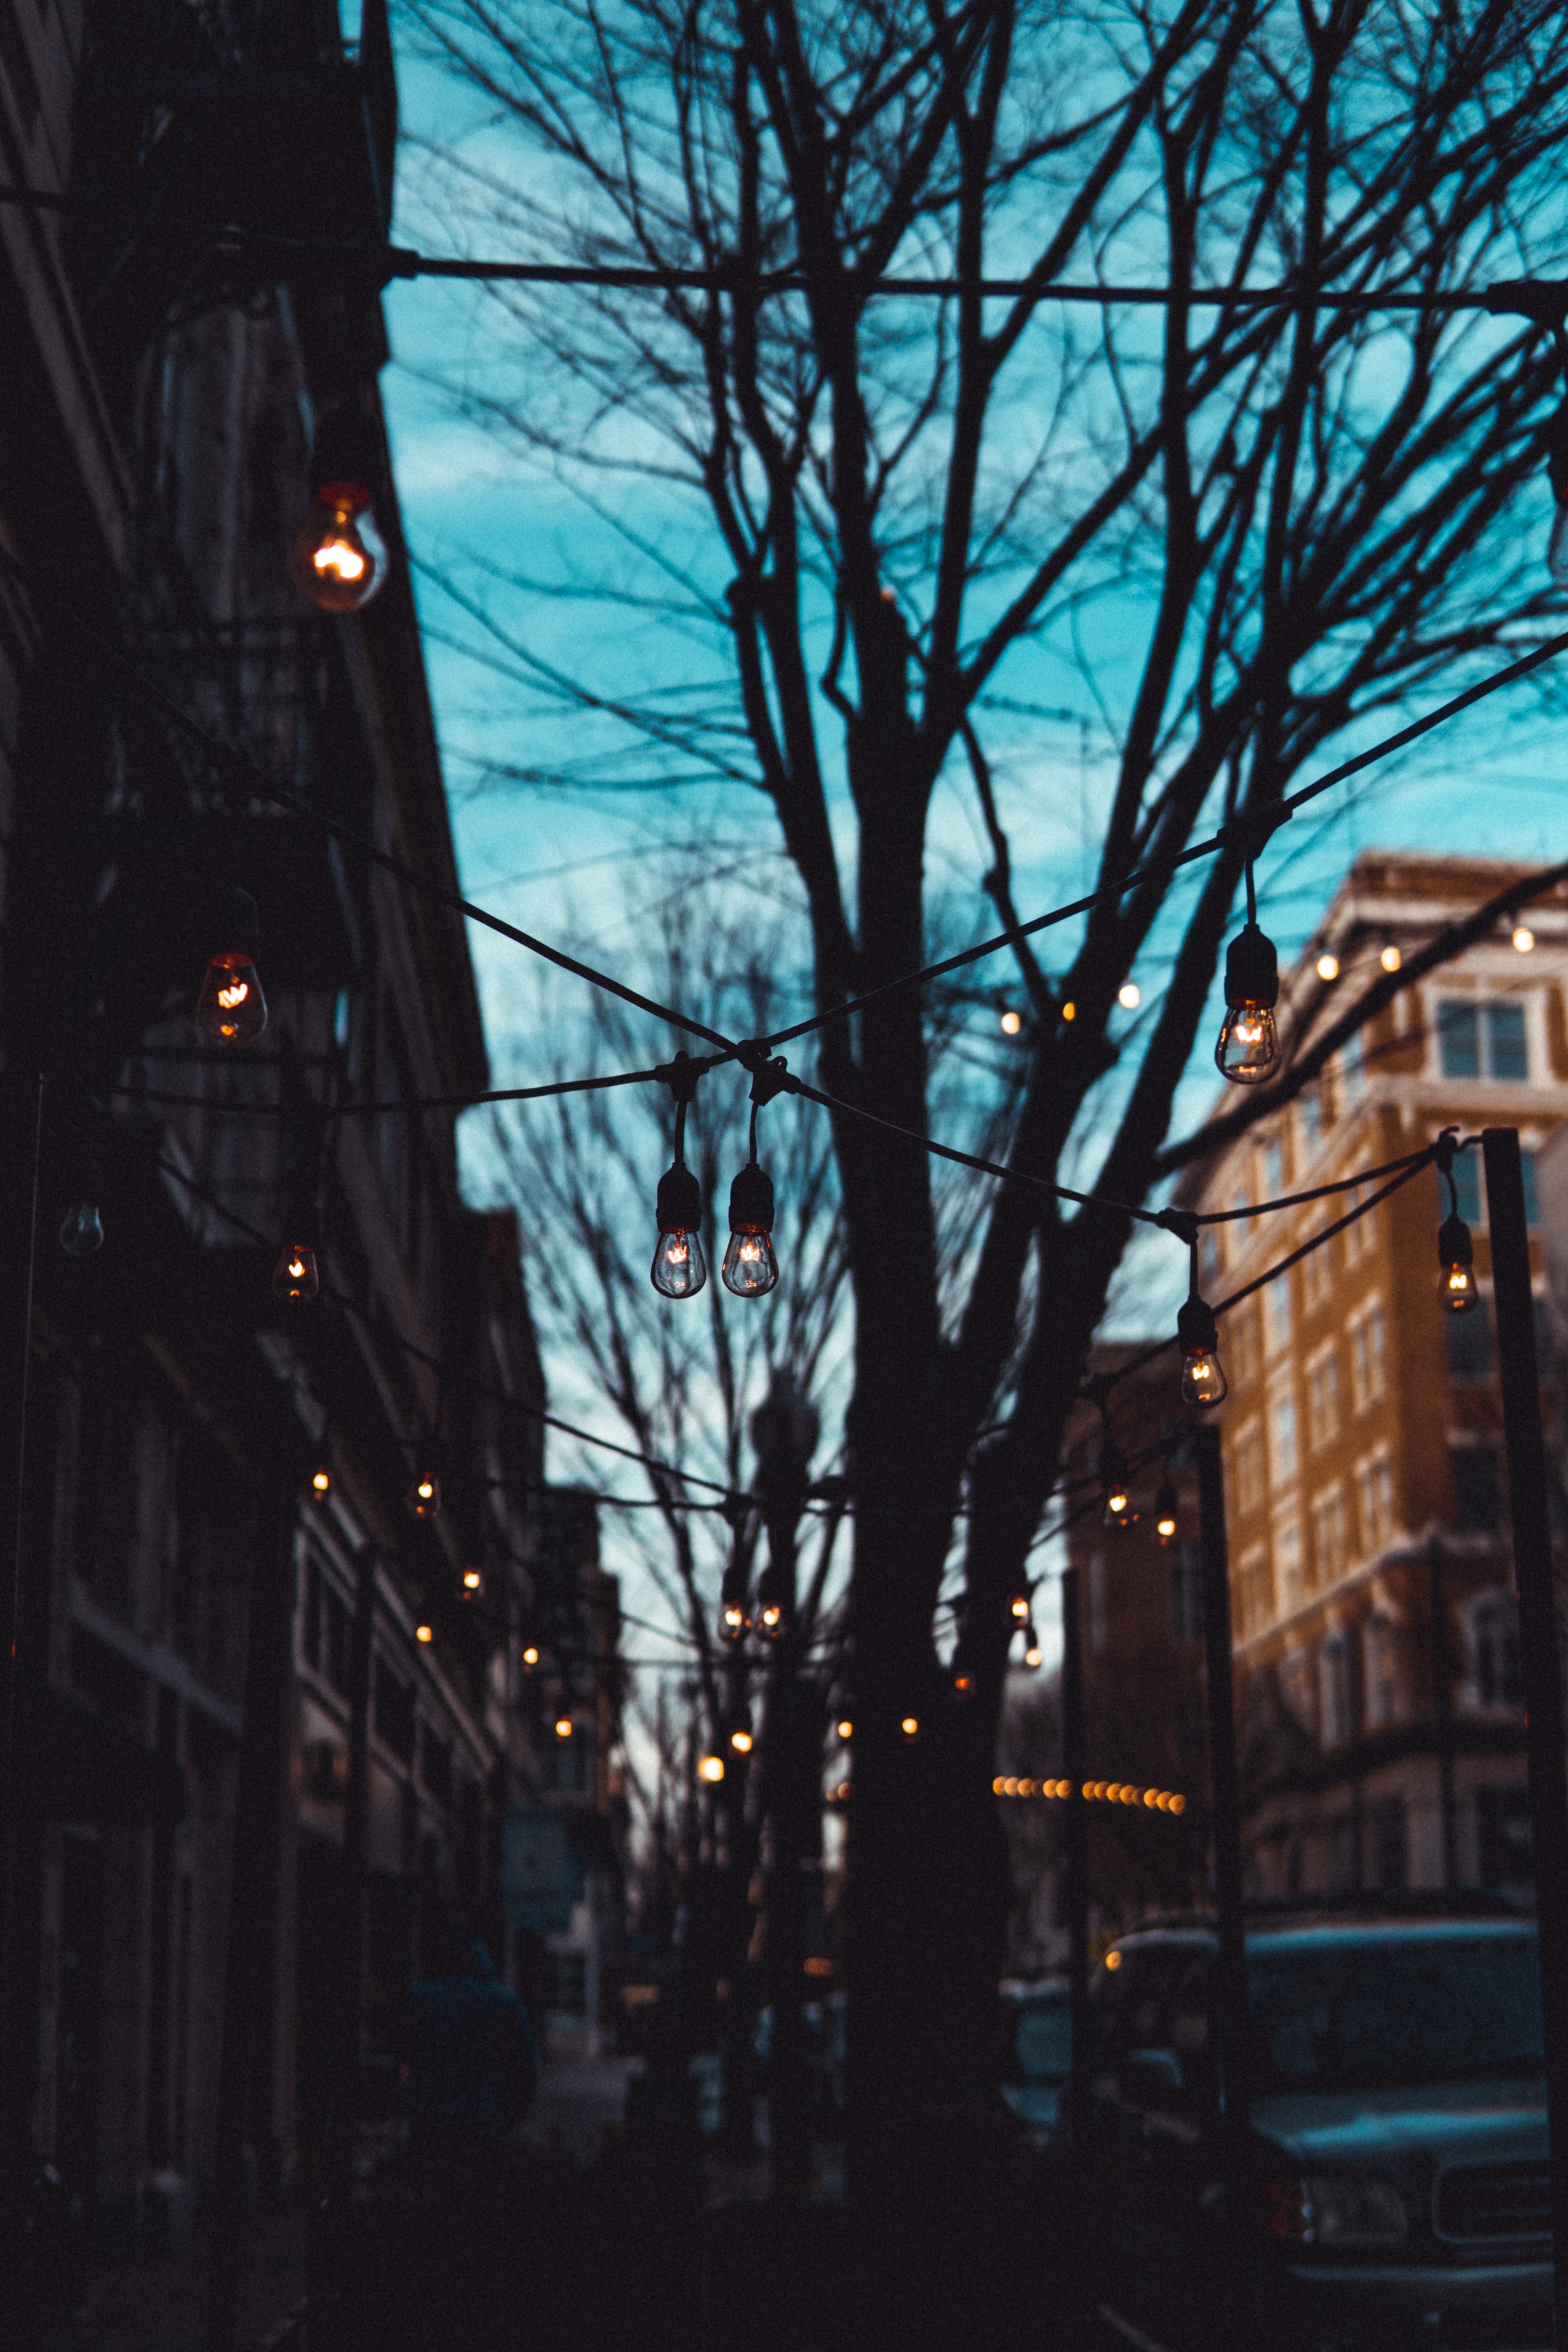 lamp, lamps, cities, trees, evening, street